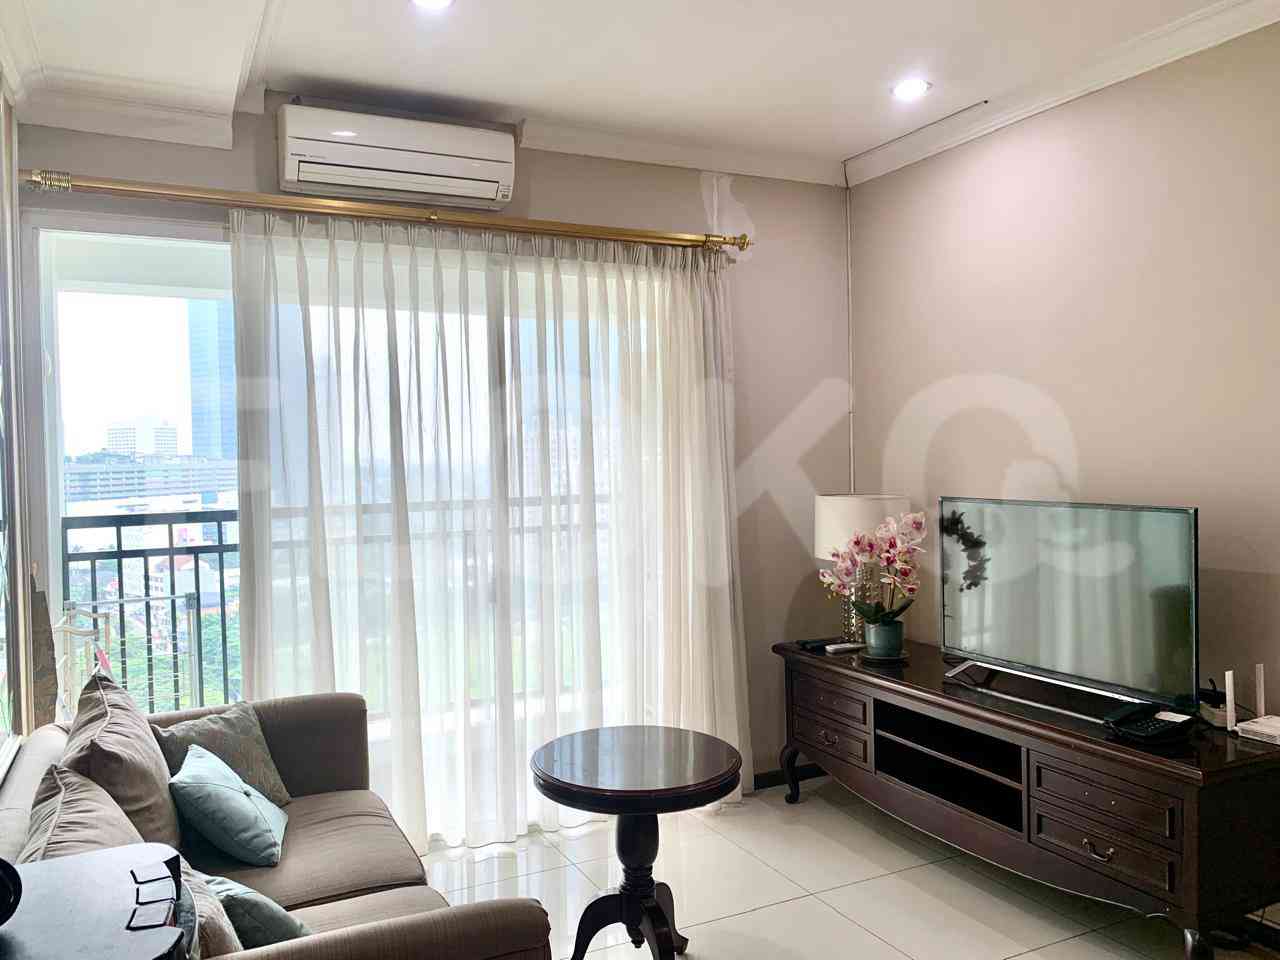 2 Bedroom on 8th Floor for Rent in Thamrin Executive Residence - fthdda 1